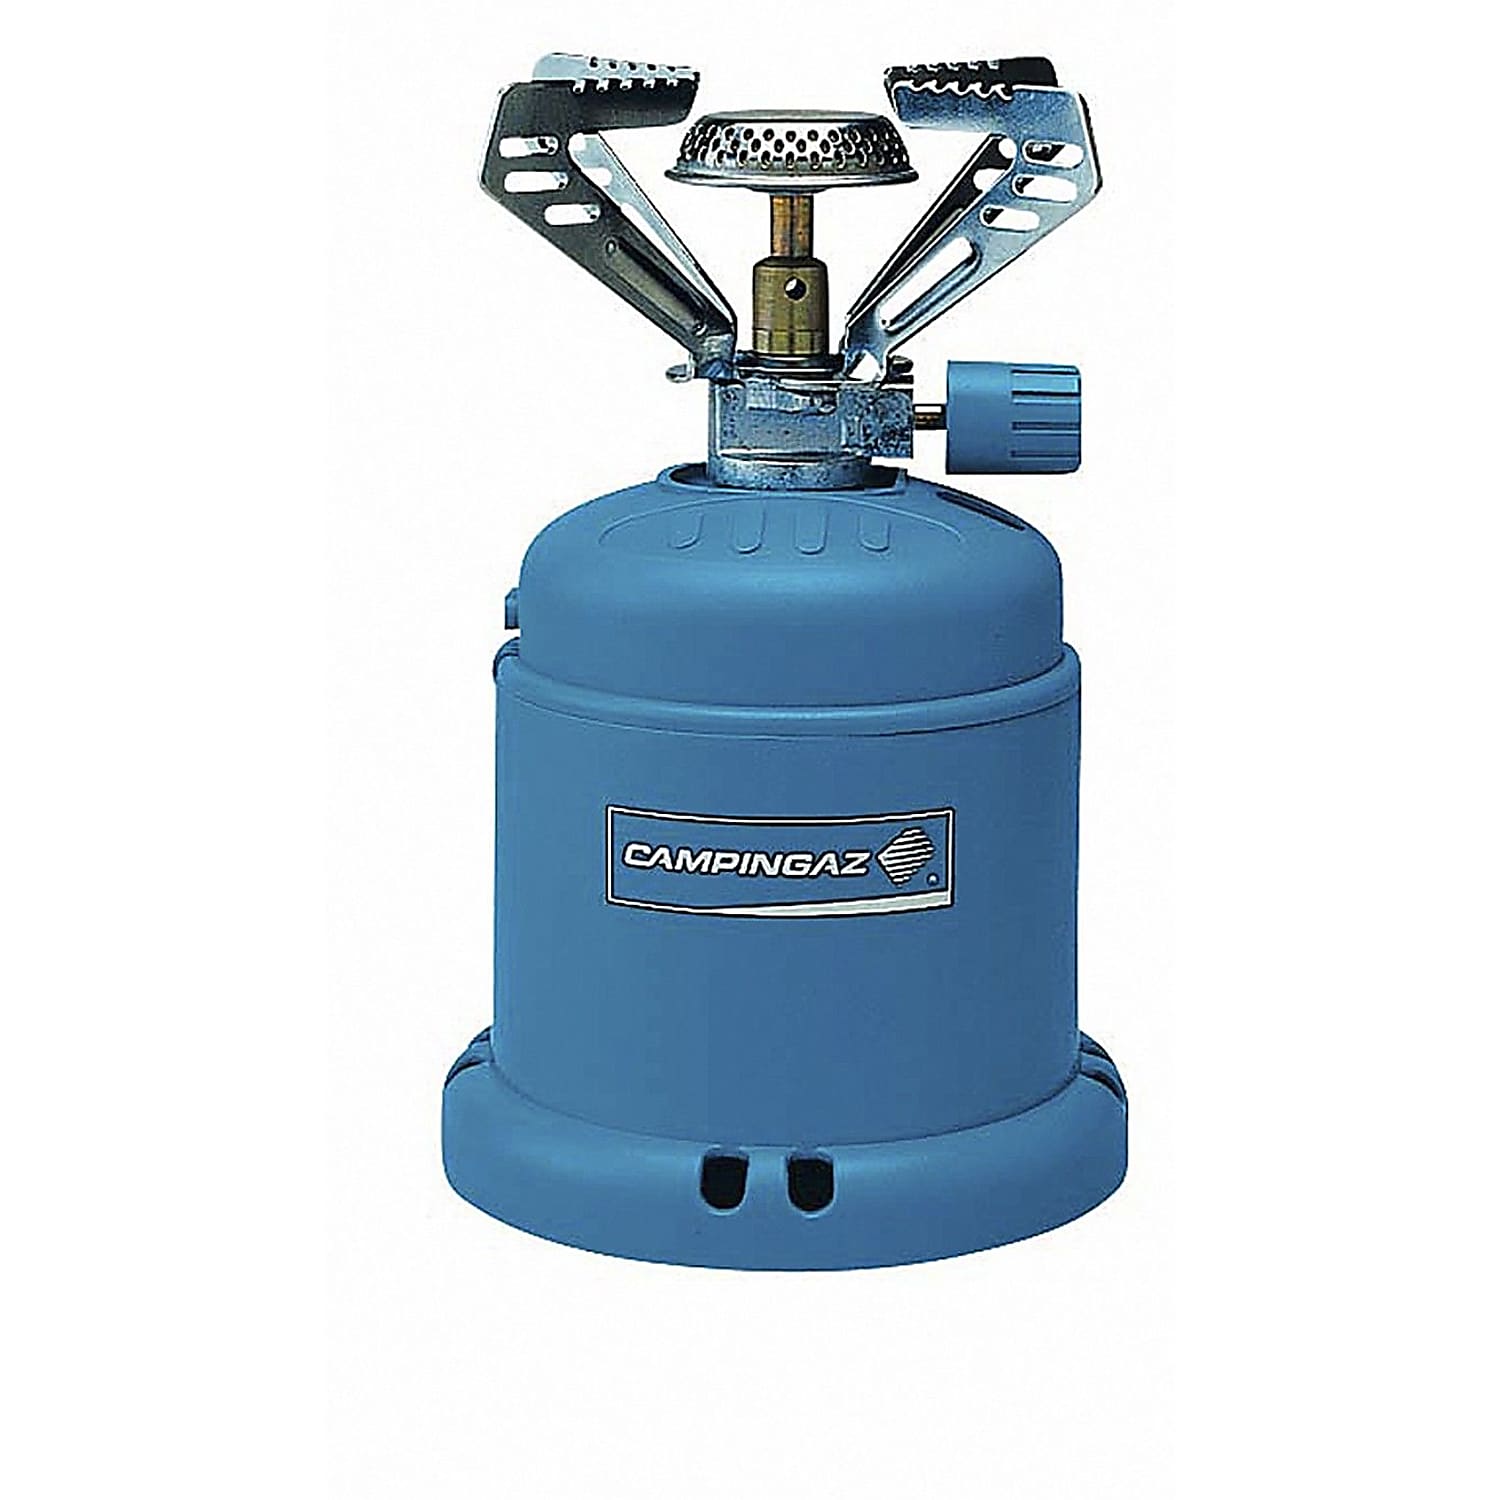 Campingaz STOVE CAMPING 206 S, Blue - Fast and cheap shipping